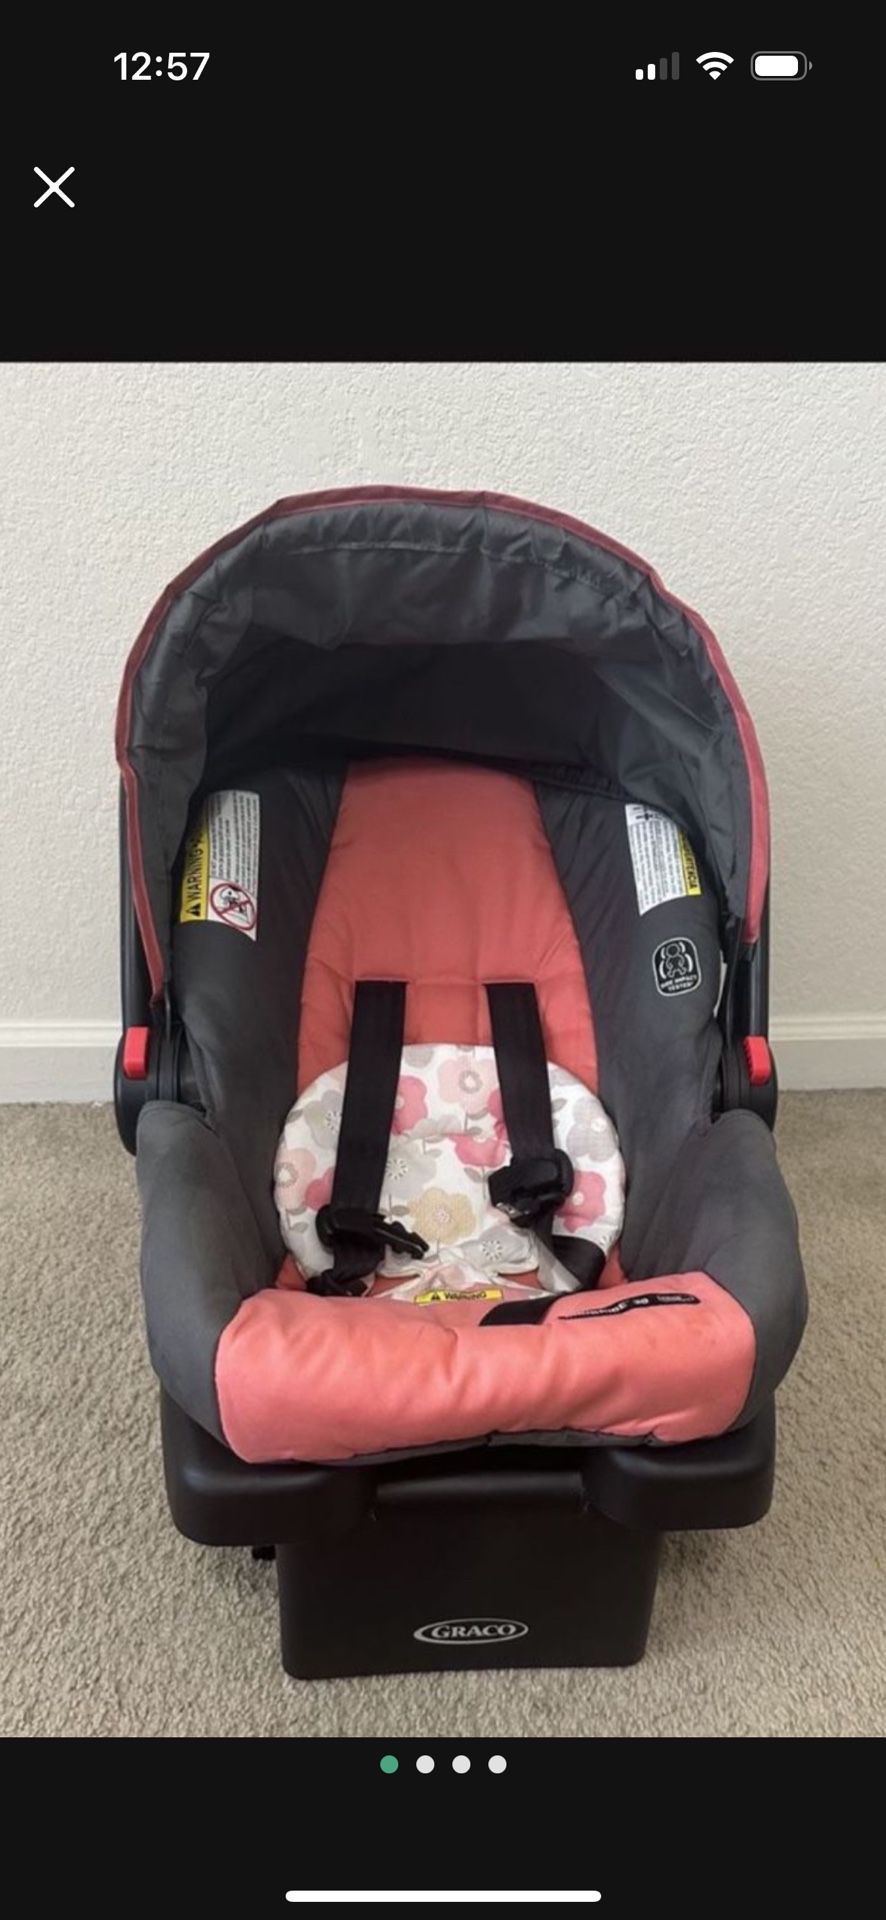 Car Seat For Baby girl